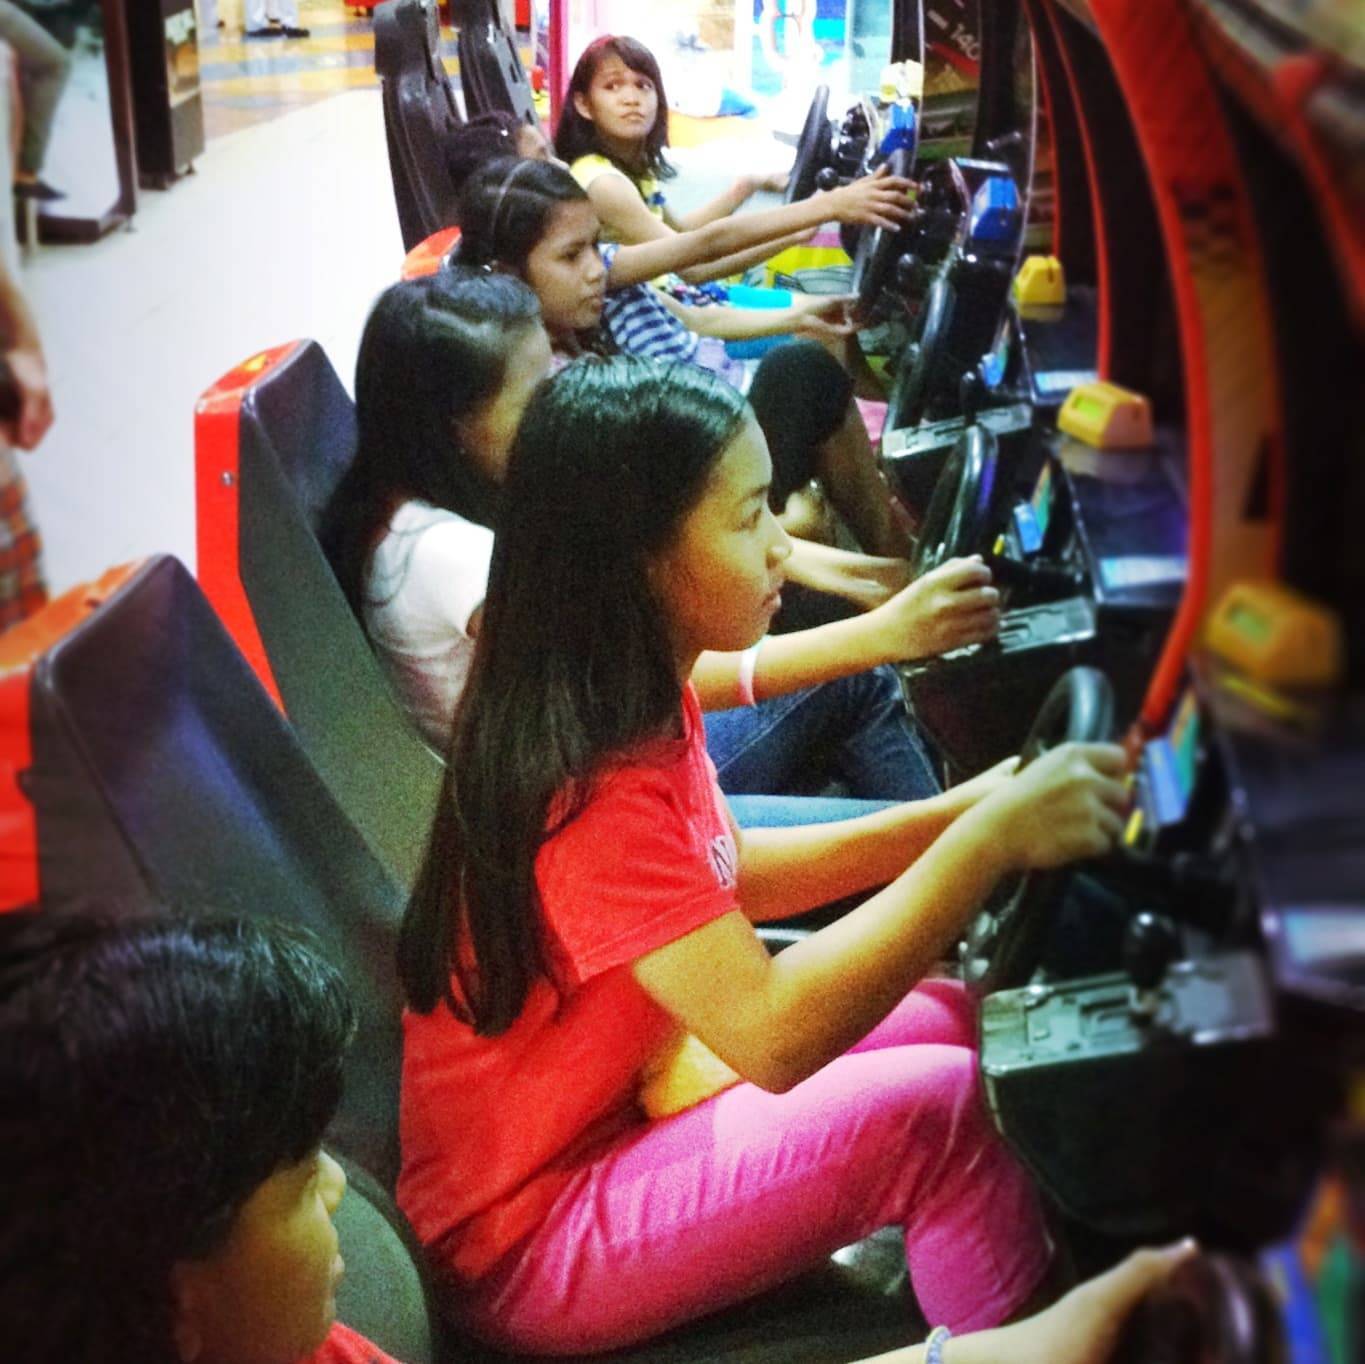 Young girls playing at an arcade.